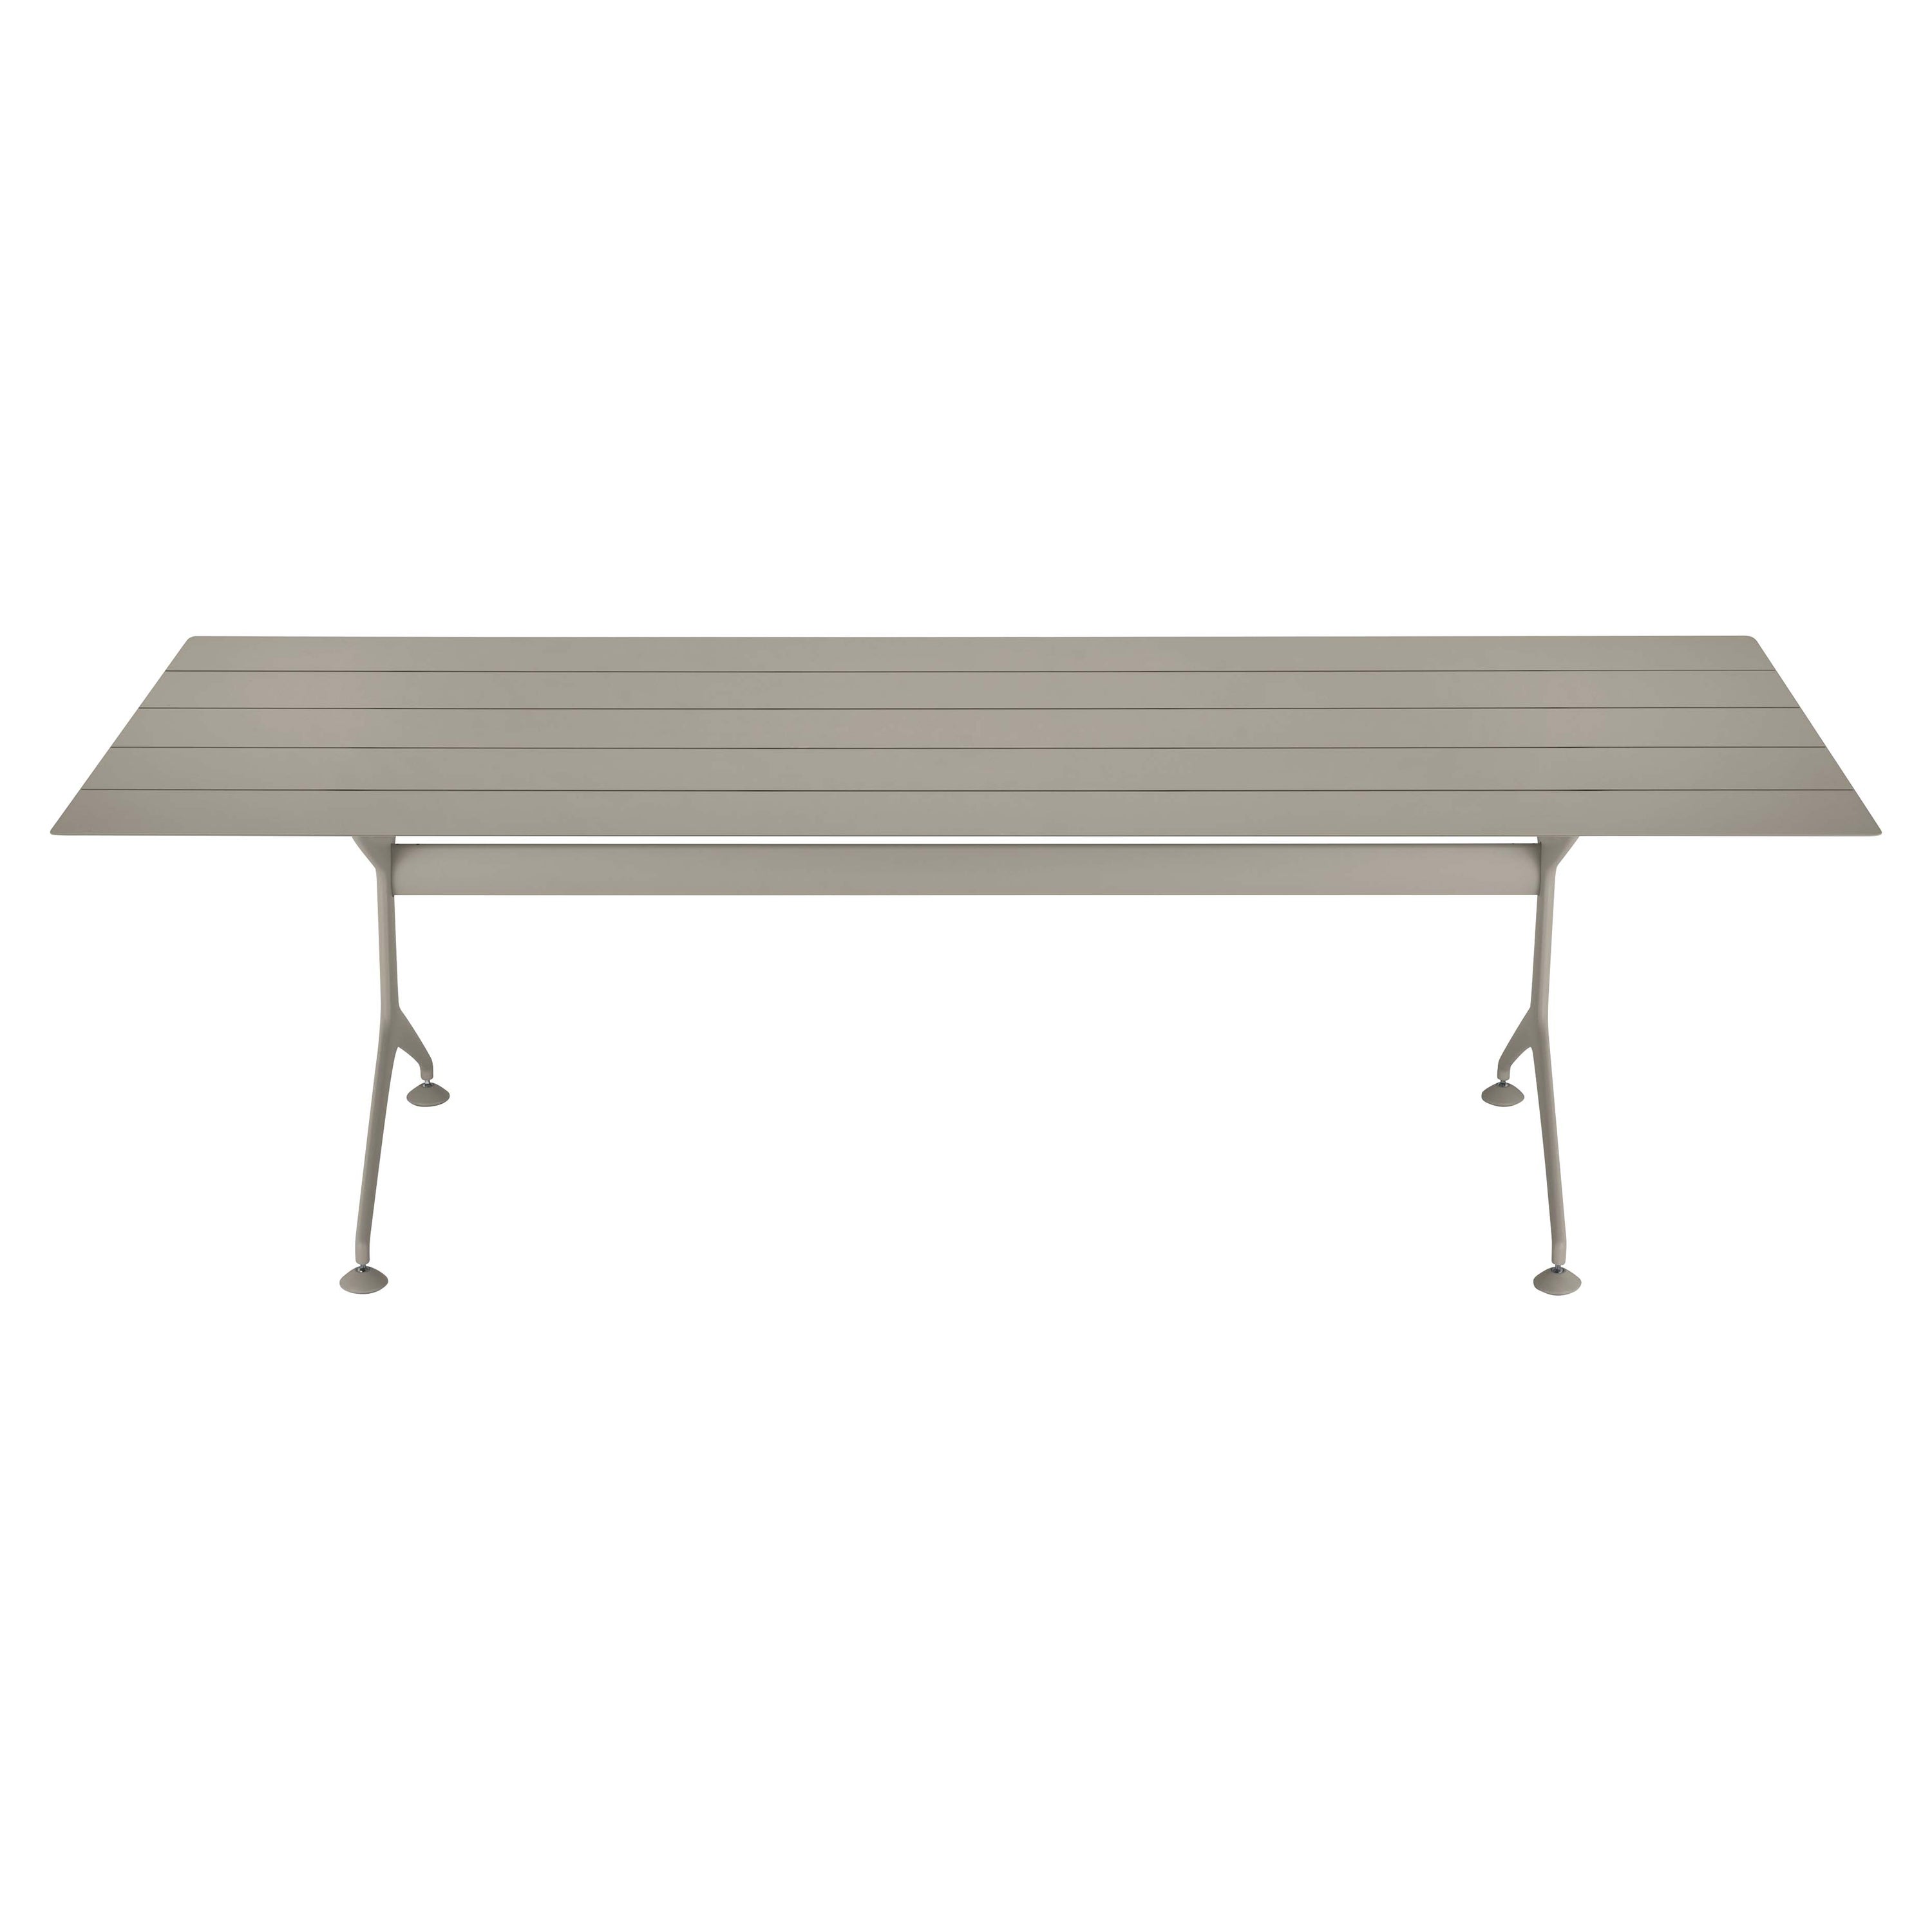 Alias 240 Outdoor Frametable in Sand Lacquered Aluminium Slats by Alberto Meda For Sale